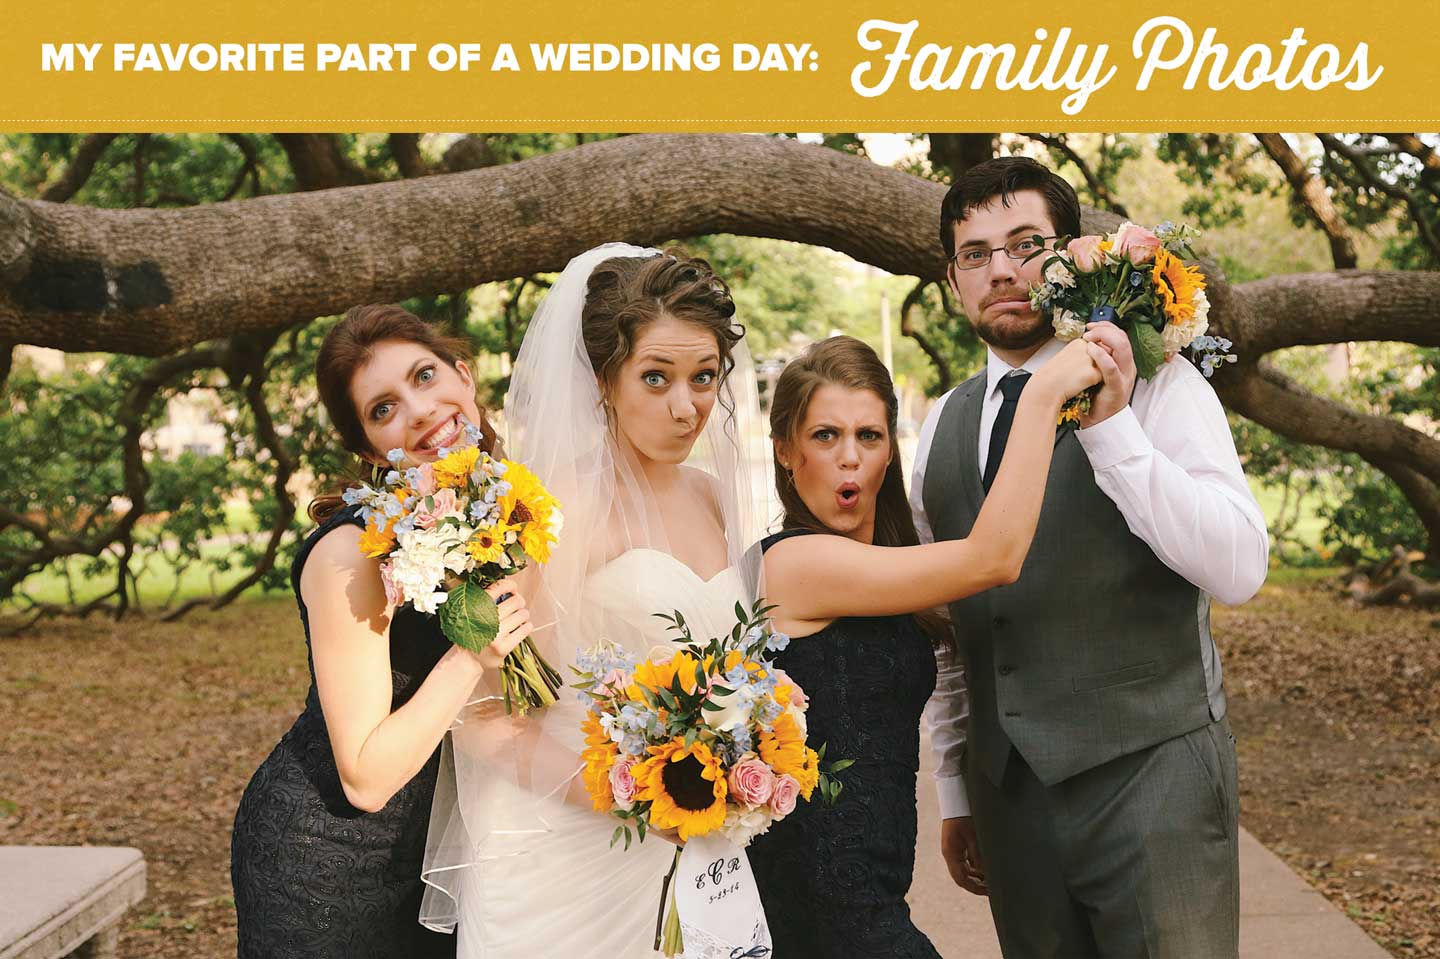 My Favorite Part Of A Wedding Day: Family Photos